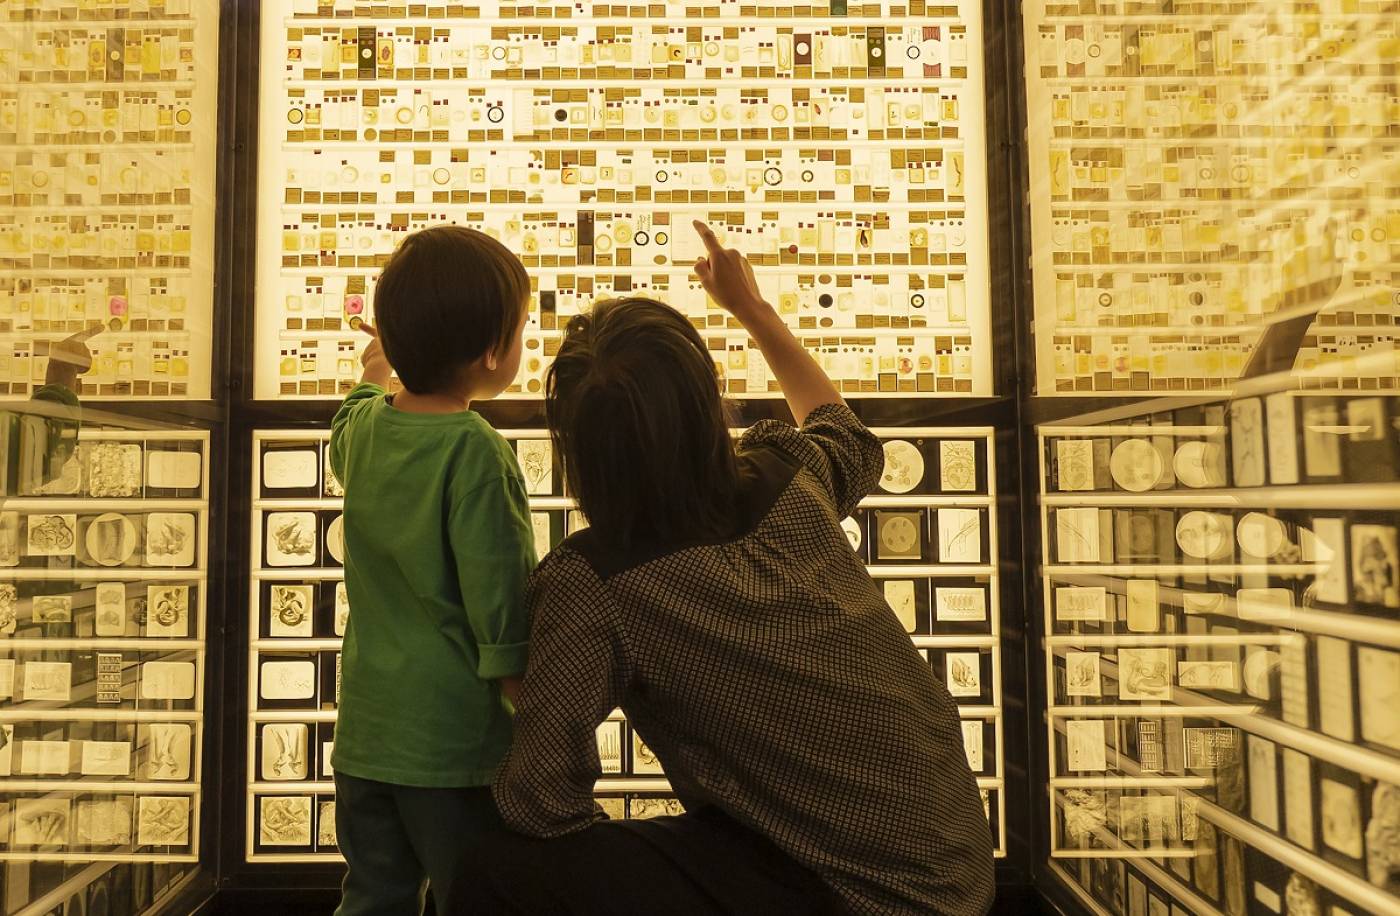 A woman crouches down next to a toddler in front of a wall of backlit microscope slides